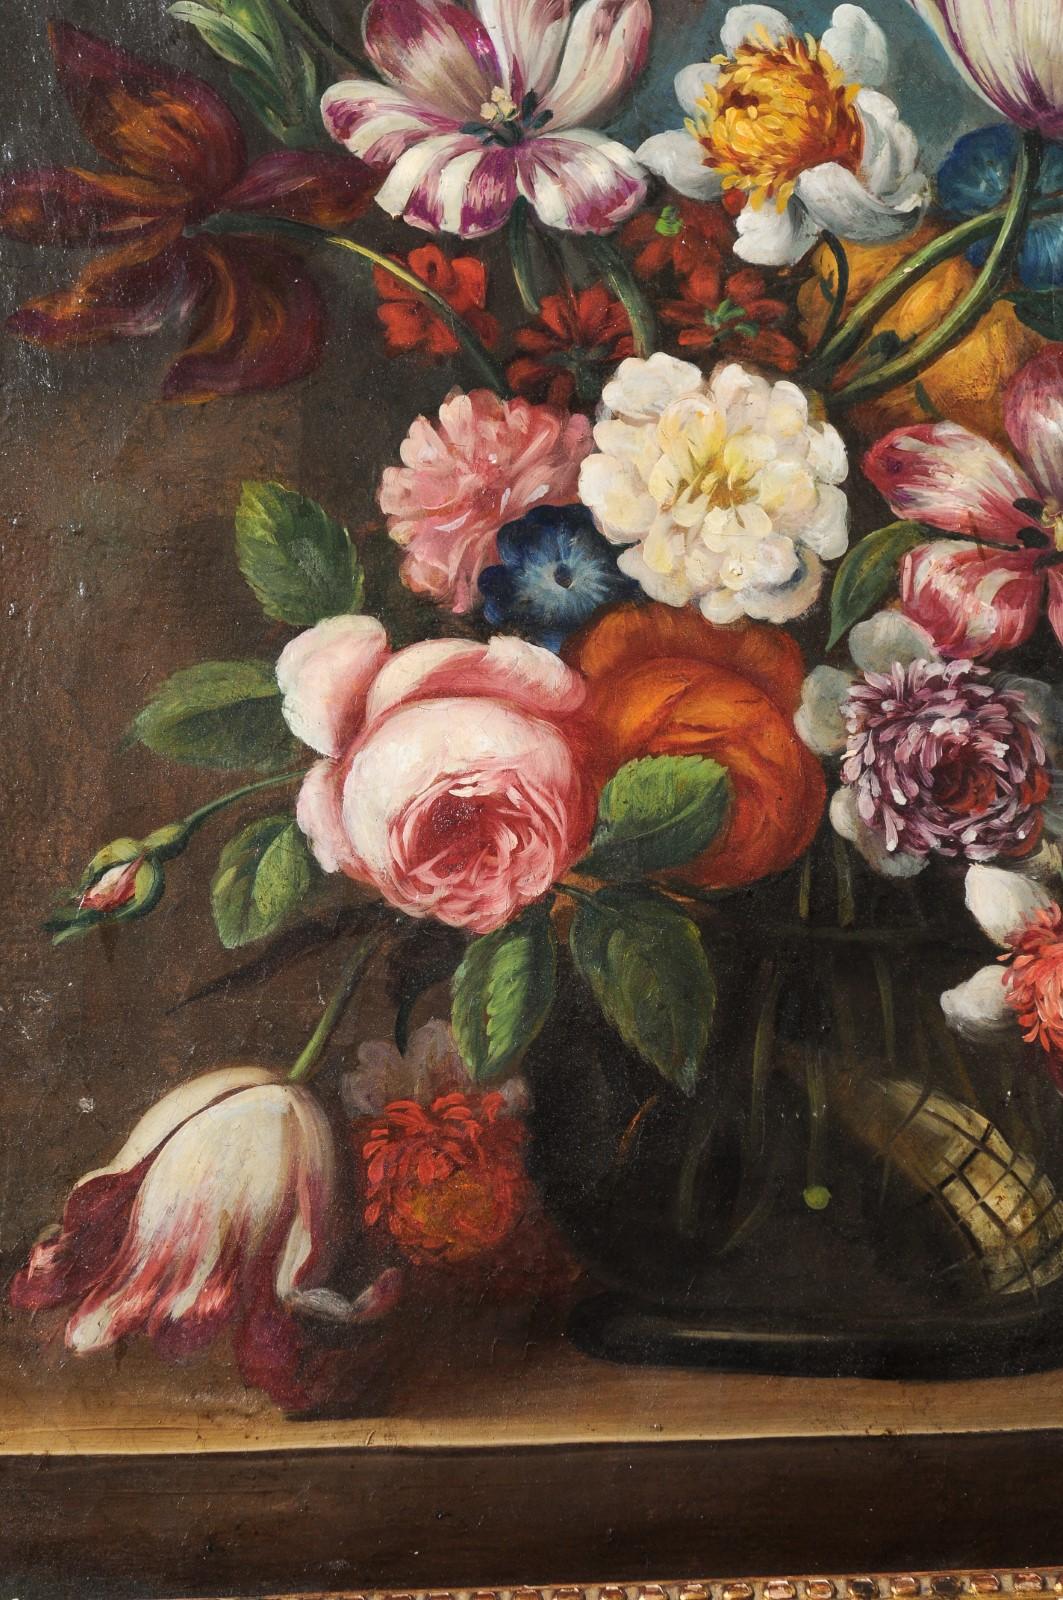 French 18th Century Oil on Canvas Floral Painting in the Dutch School Style For Sale 4